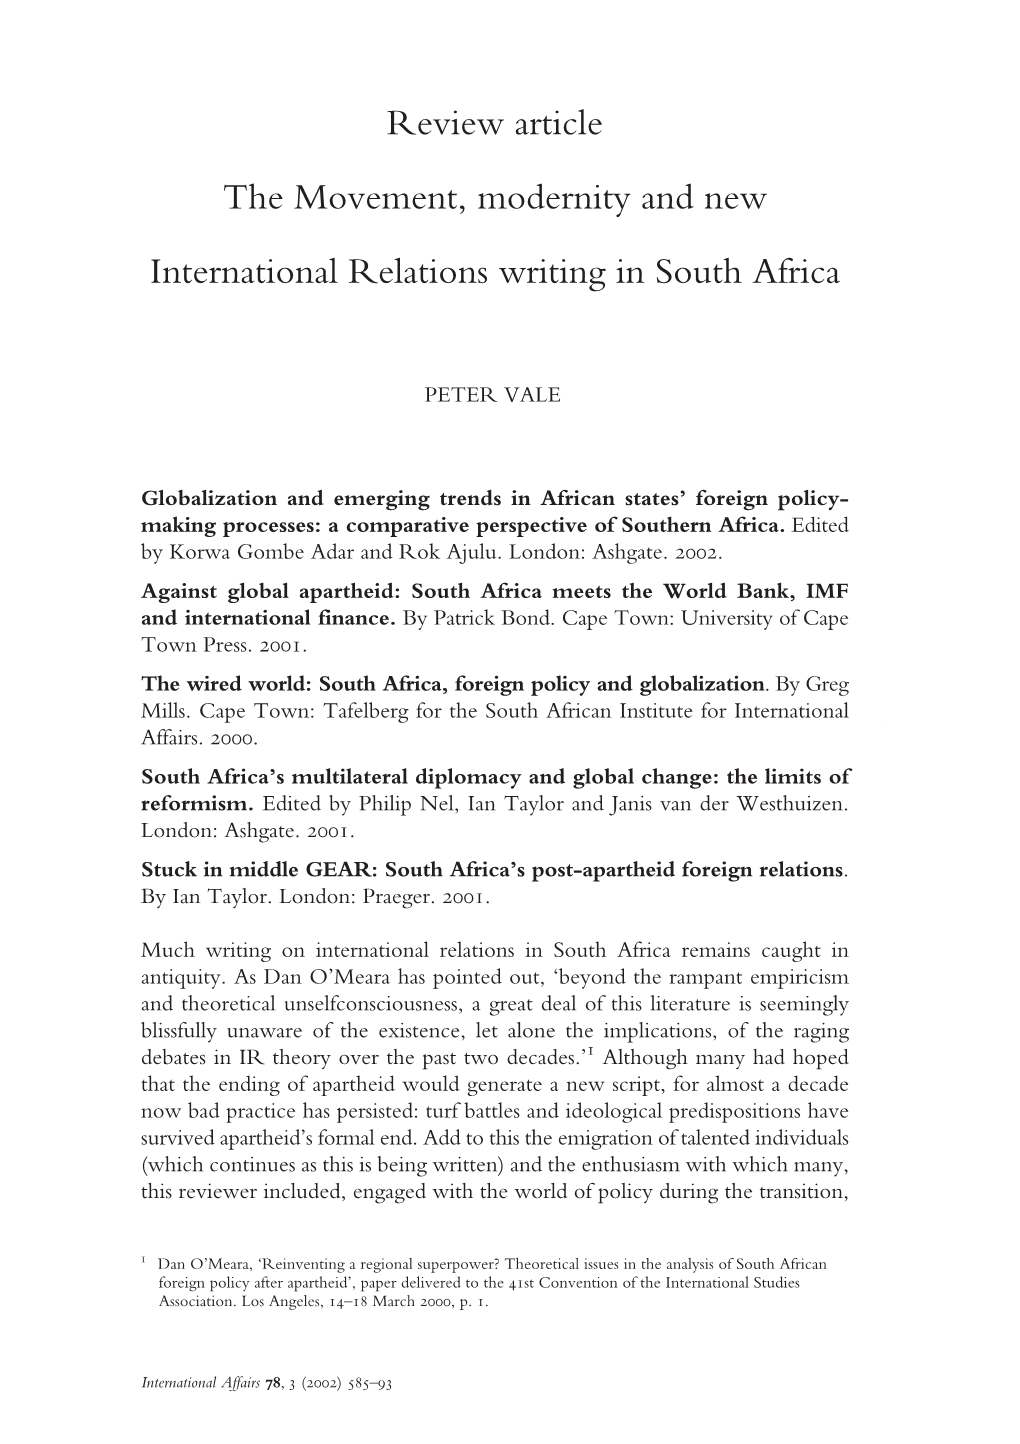 Review Article the Movement, Modernity and New International Relations Writing in South Africa